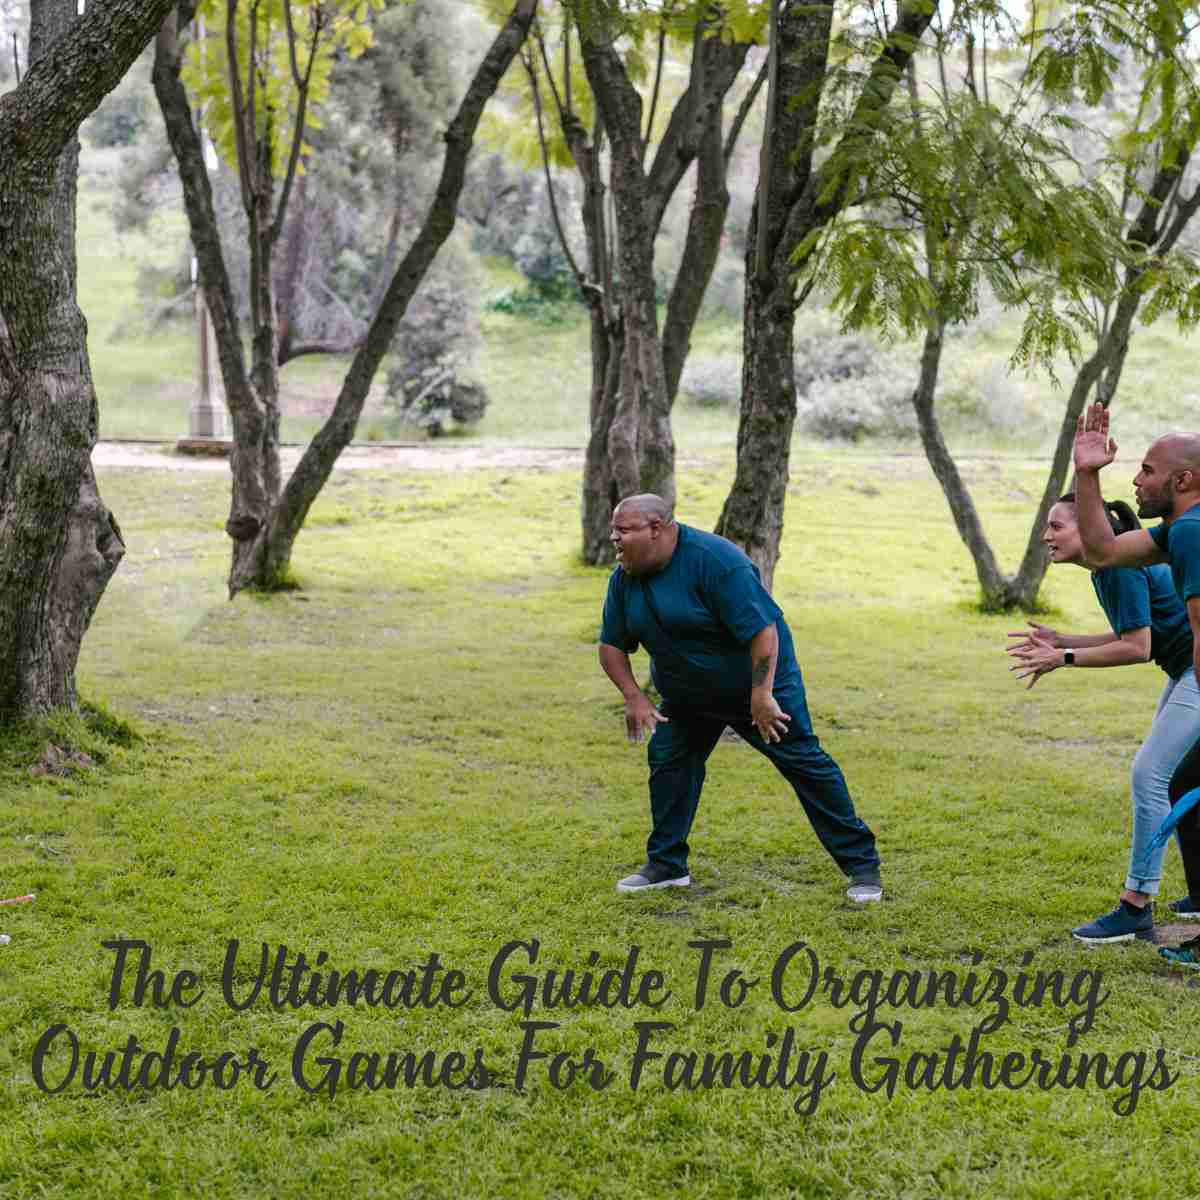 Outdoor Games For Family Gatherings